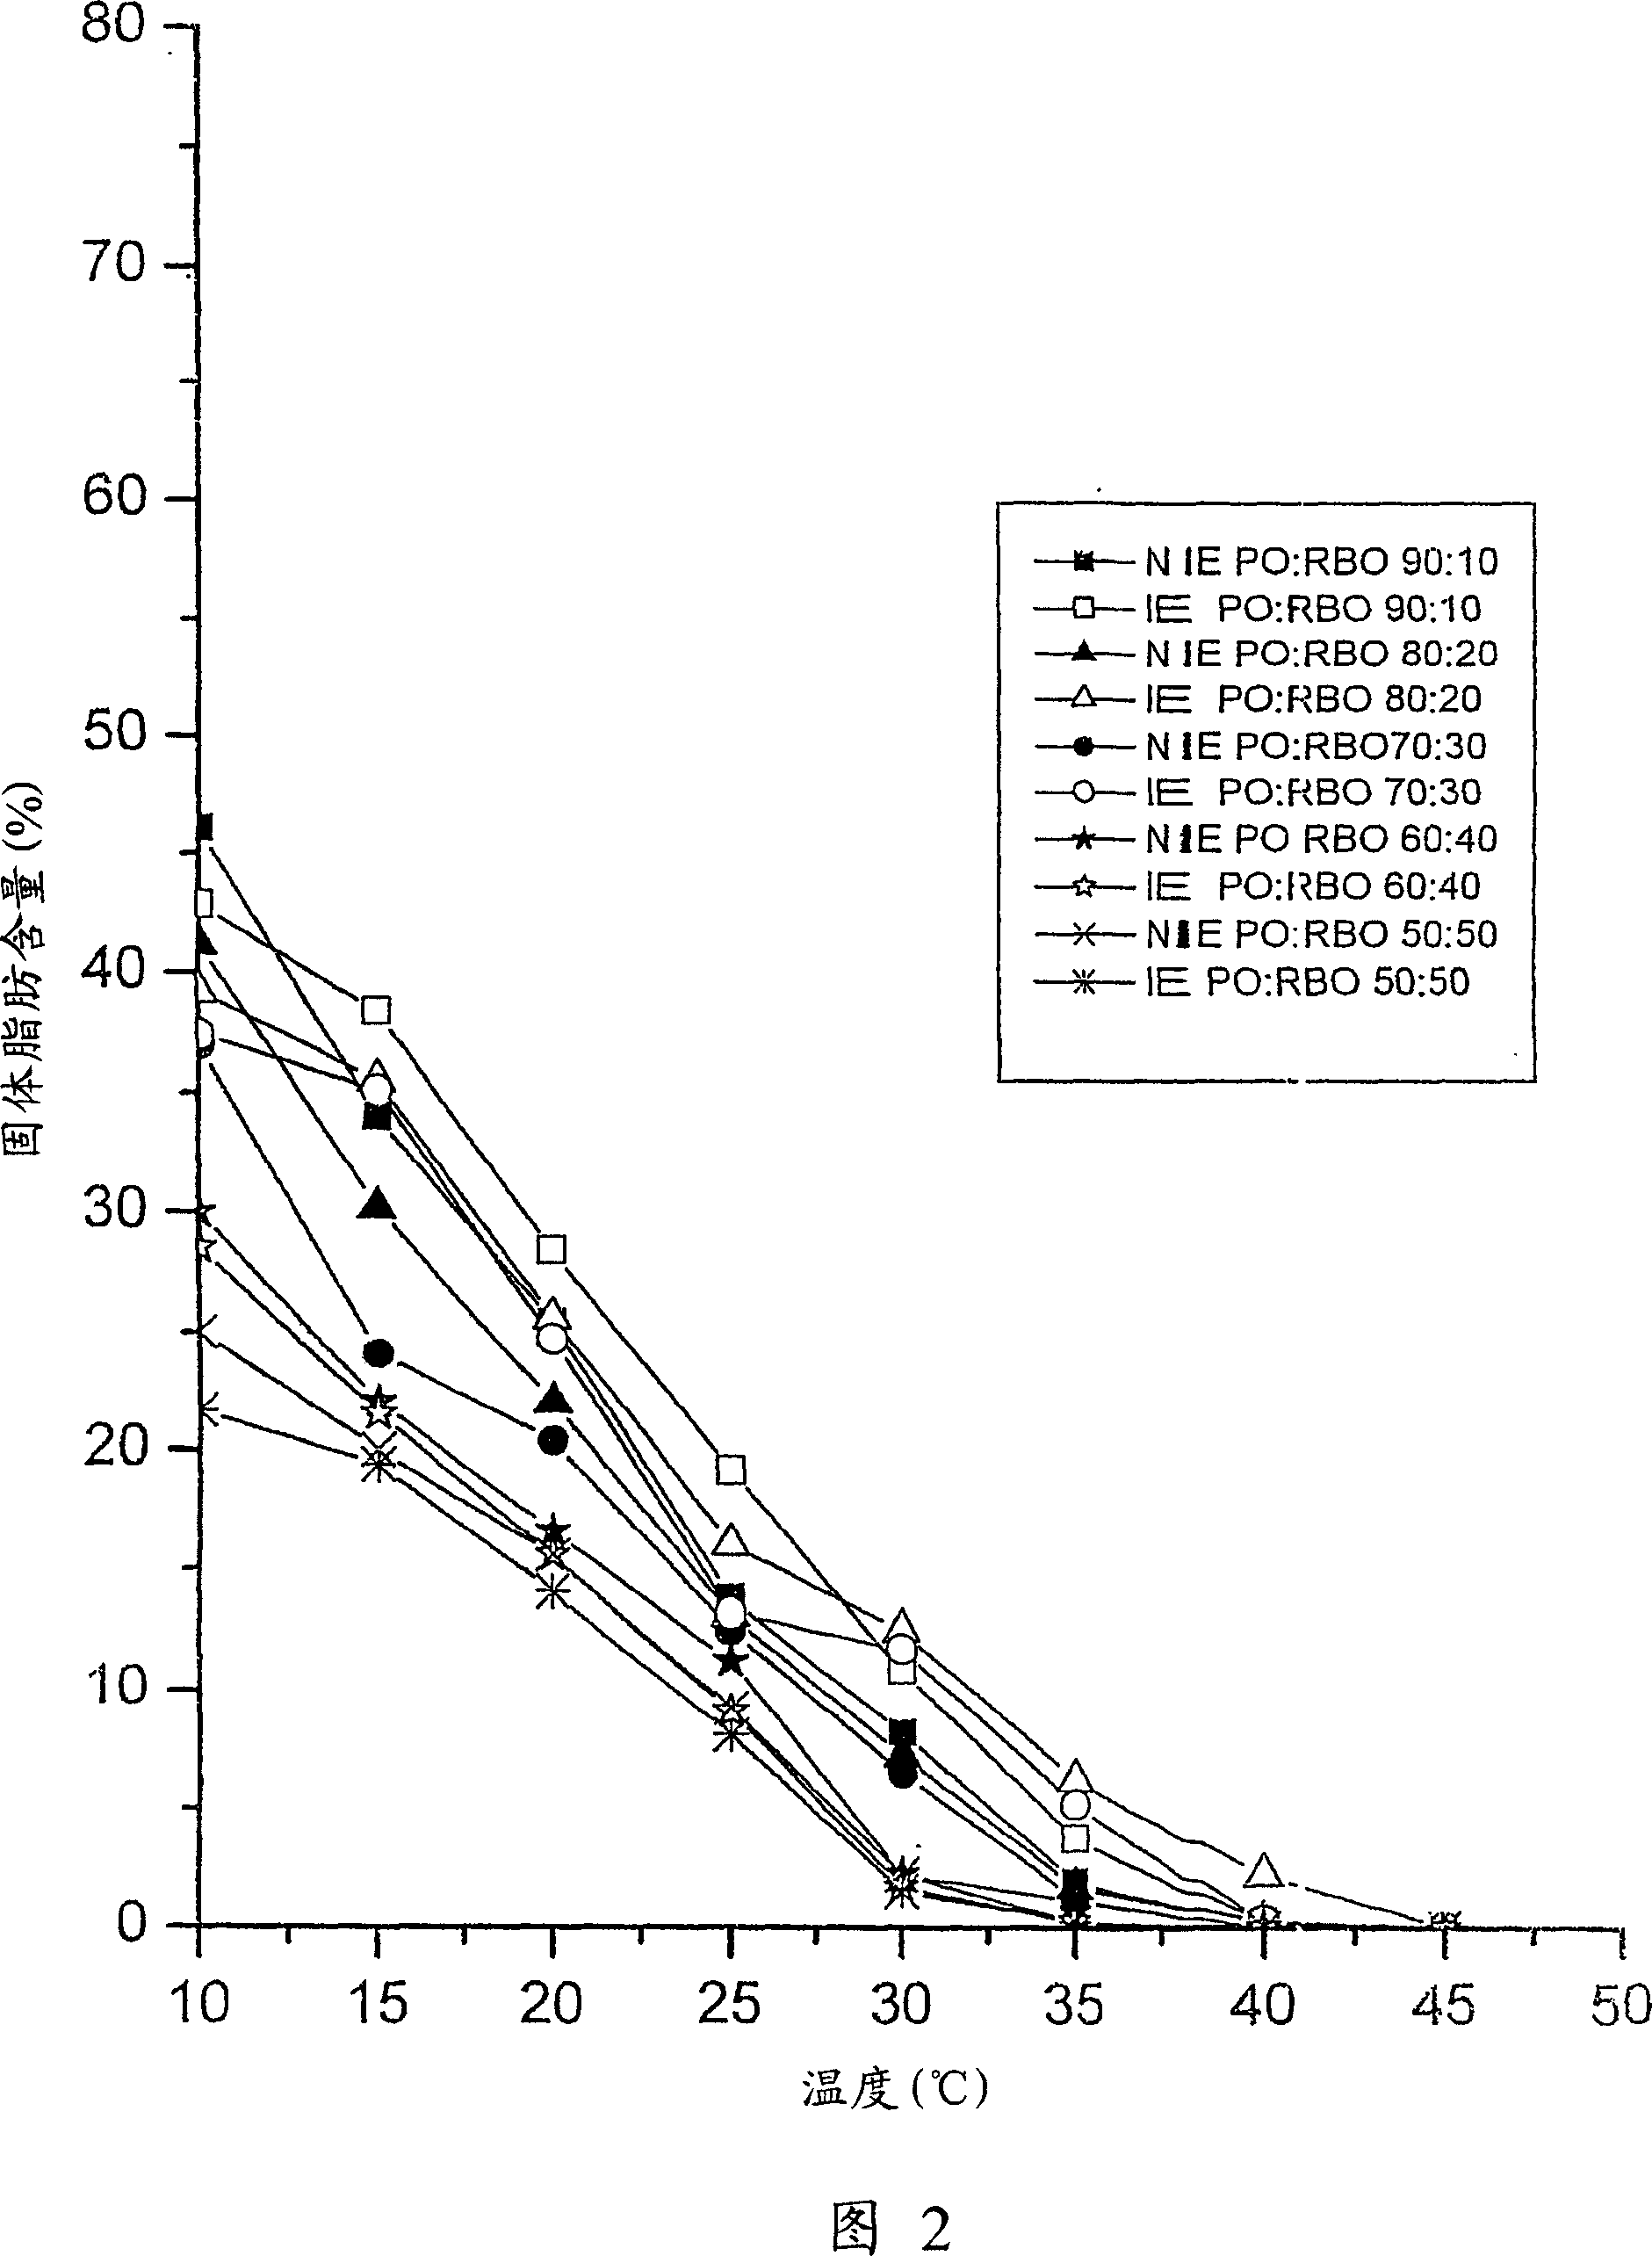 Process for production of micronutrient rich zero trans shortenings